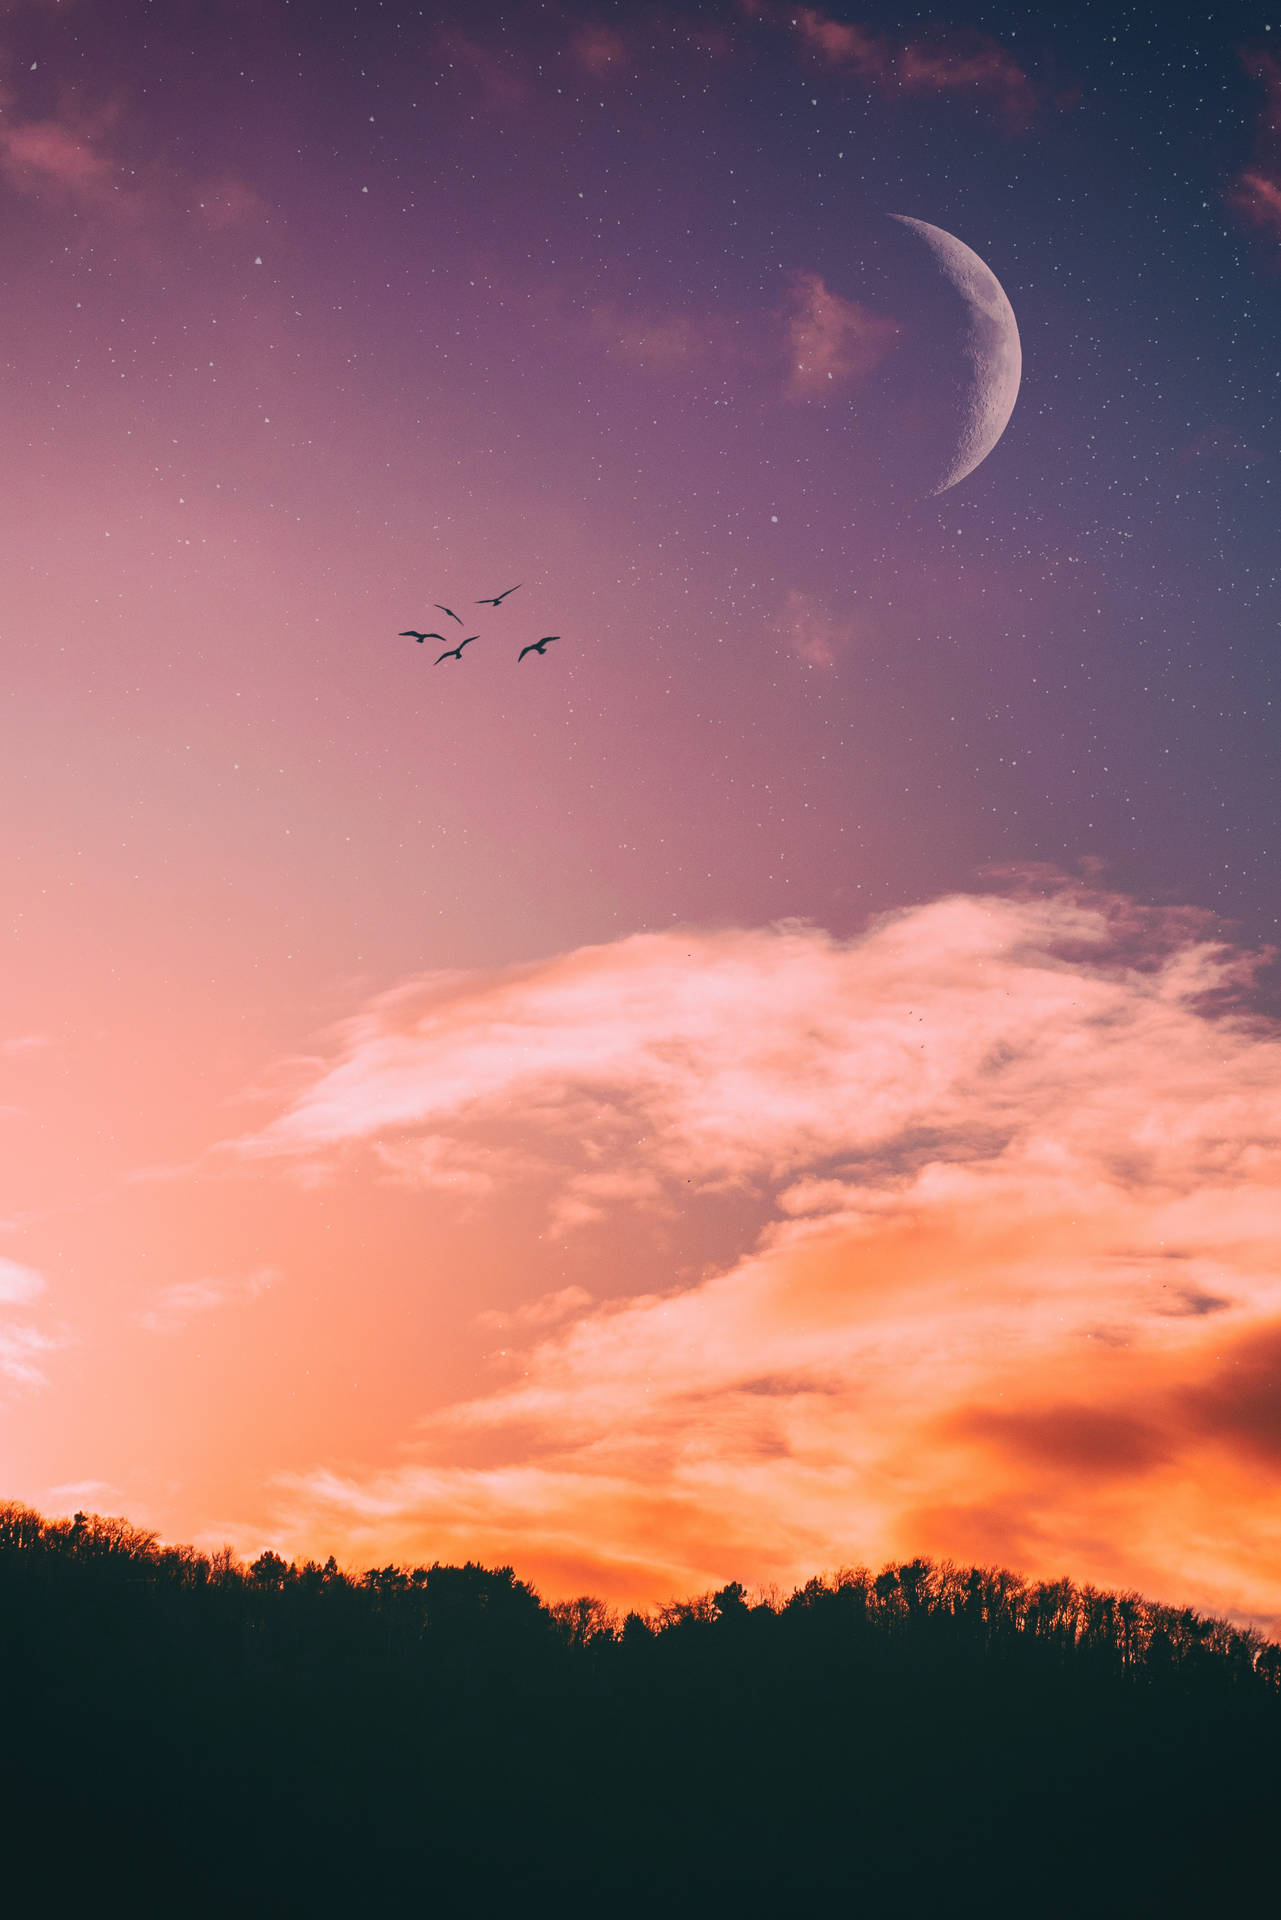 Aesthetic Sky And Crescent Moon With Birds Background